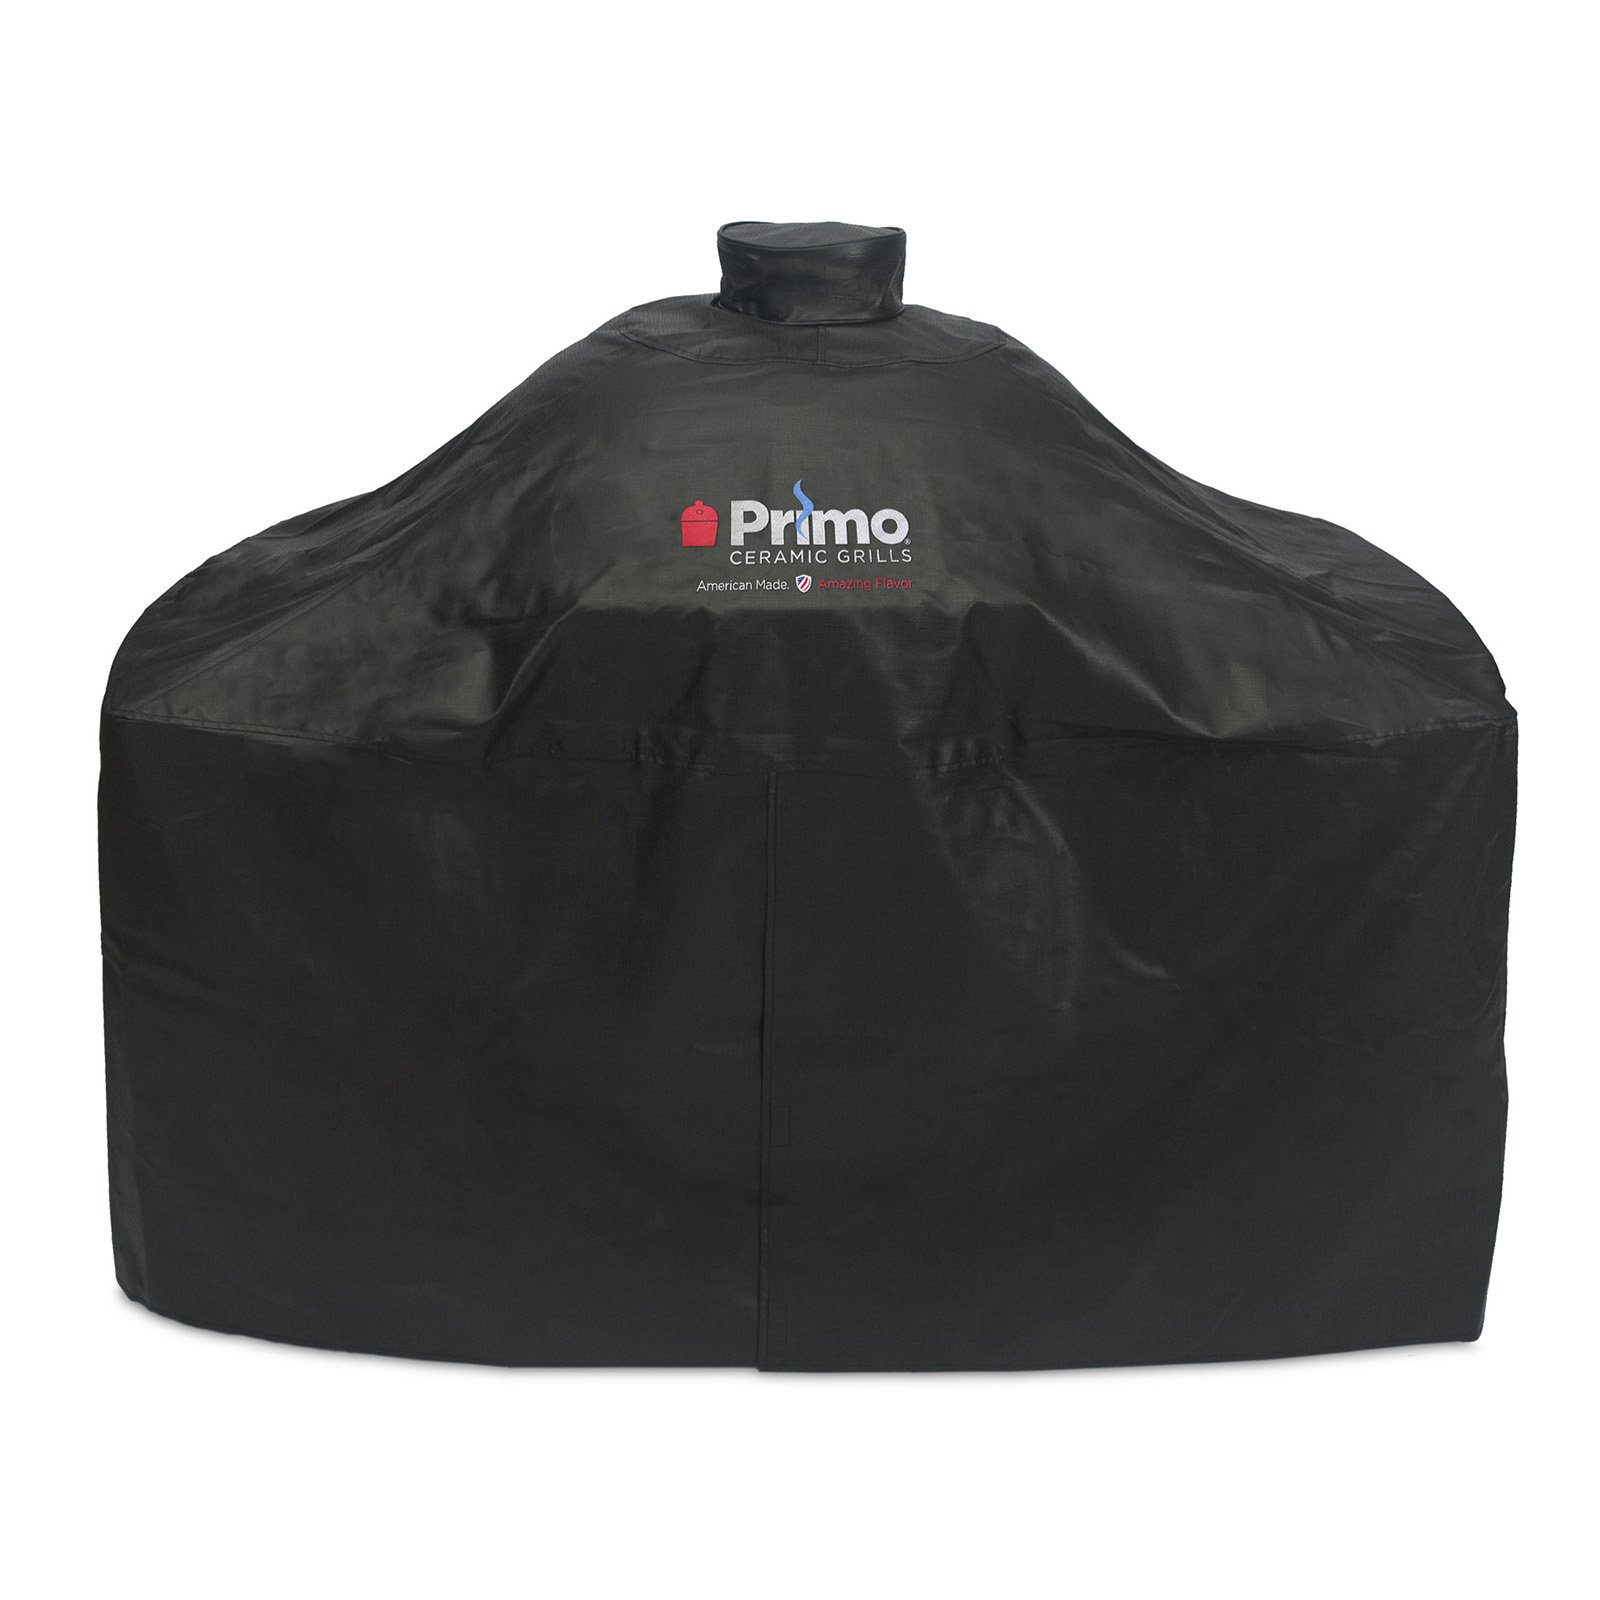 Primo Grills PMGPG00417 Grill Cover for XL 400 with Island Top LG 300 & Island Top - image 1 of 3